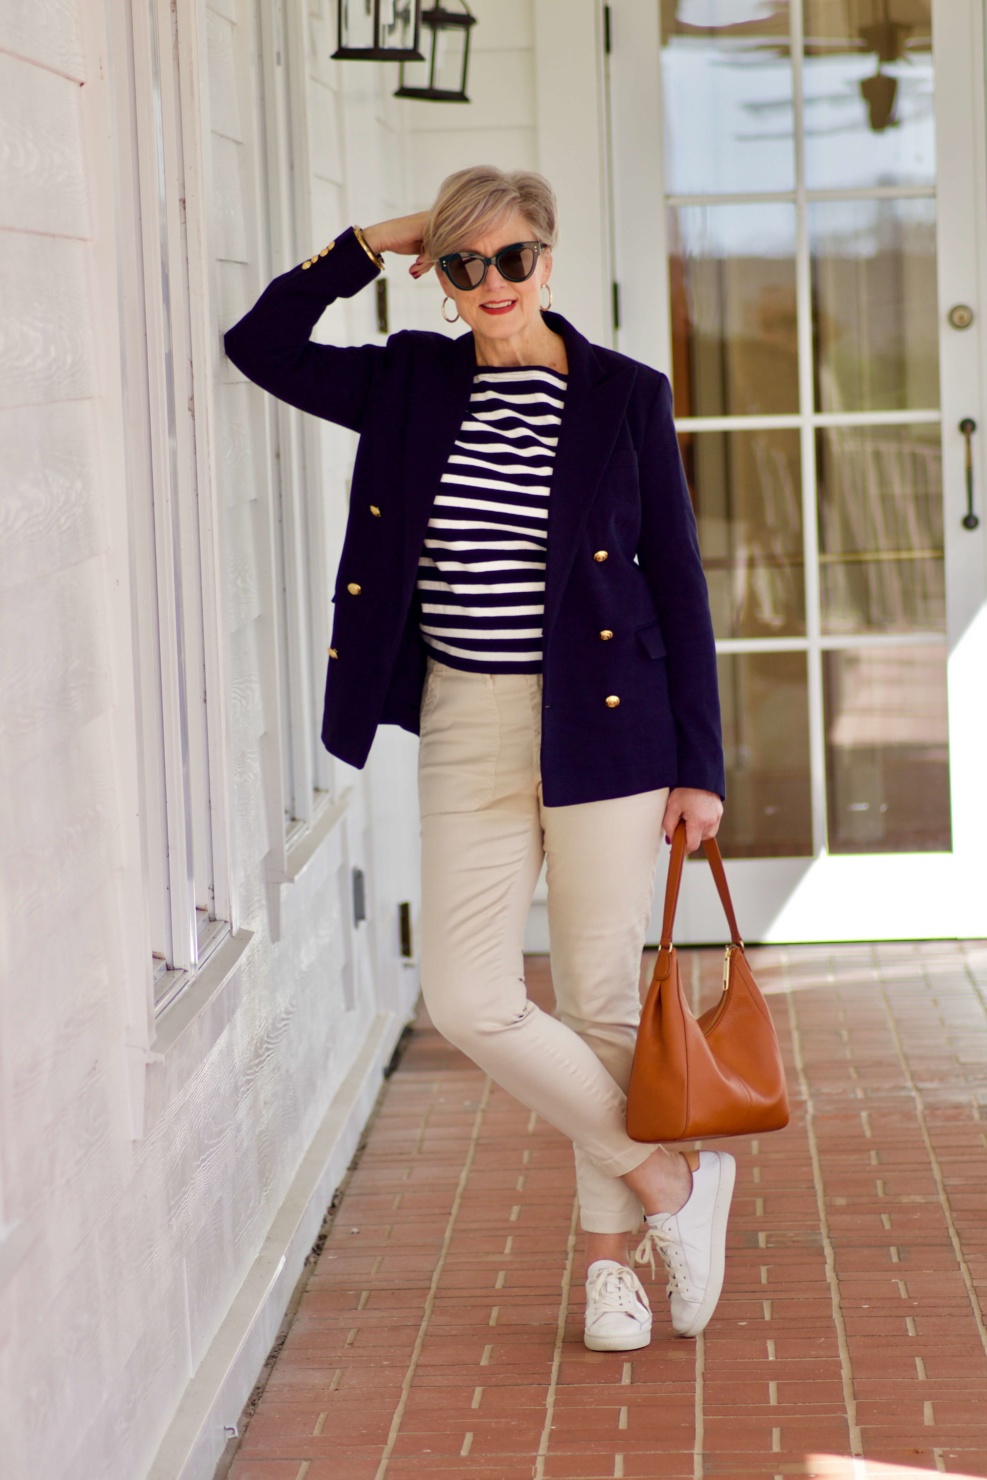 beth from Style at a Certain Age wears J.Crew striped tee, chinos, Ralph Lauren navy blue knit blazer, and white sneakers